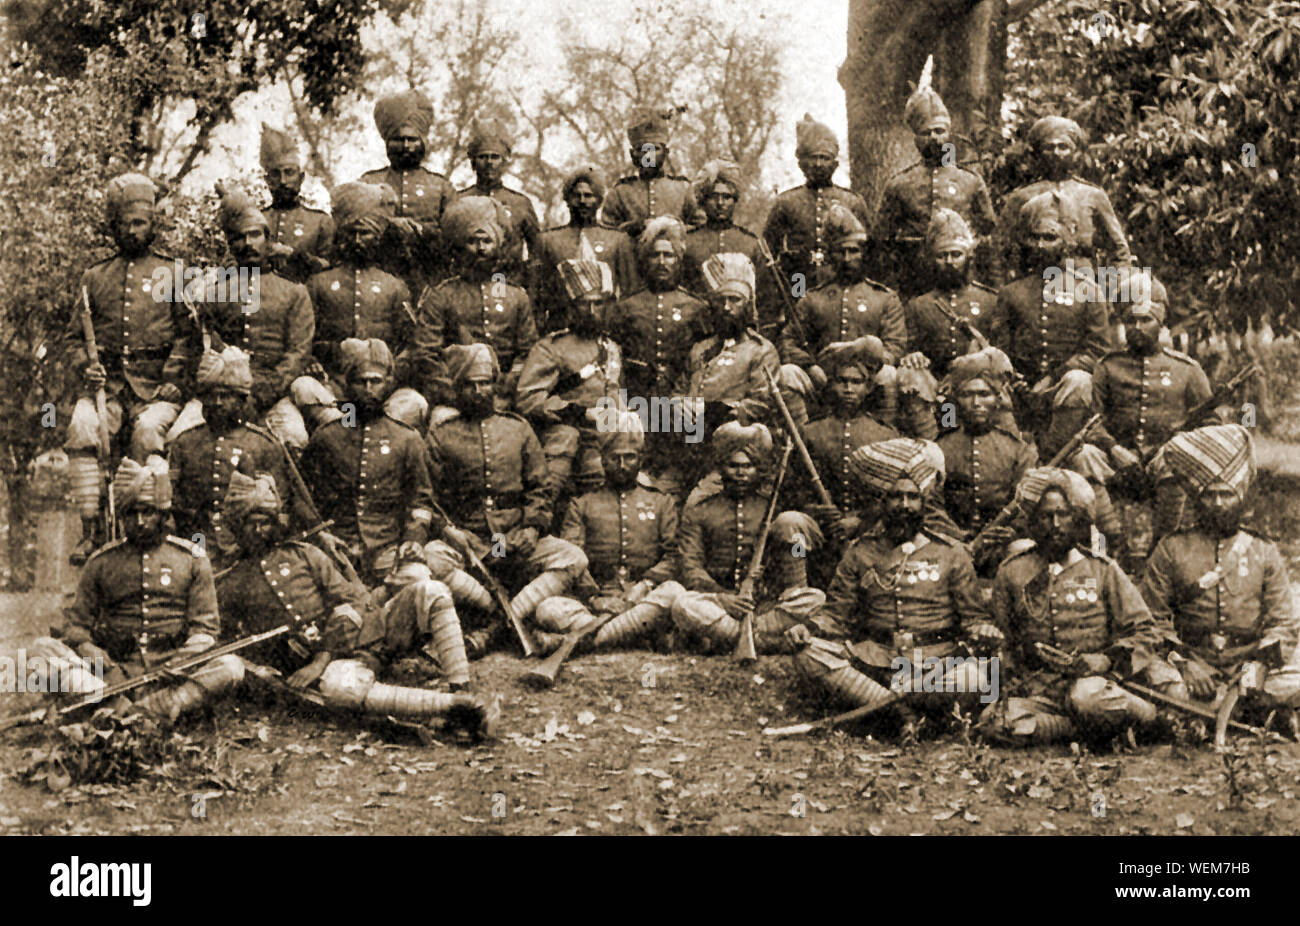 A group of Sepoys pictured in 1912- including Sikhs,Ghoorkas (Gurkhas) ,Pathans and a Dogra officer - A sepoy was an Indian foot-soldier of any religion who served in either the East India Company Army or, as here, in  the British Indian Army Stock Photo